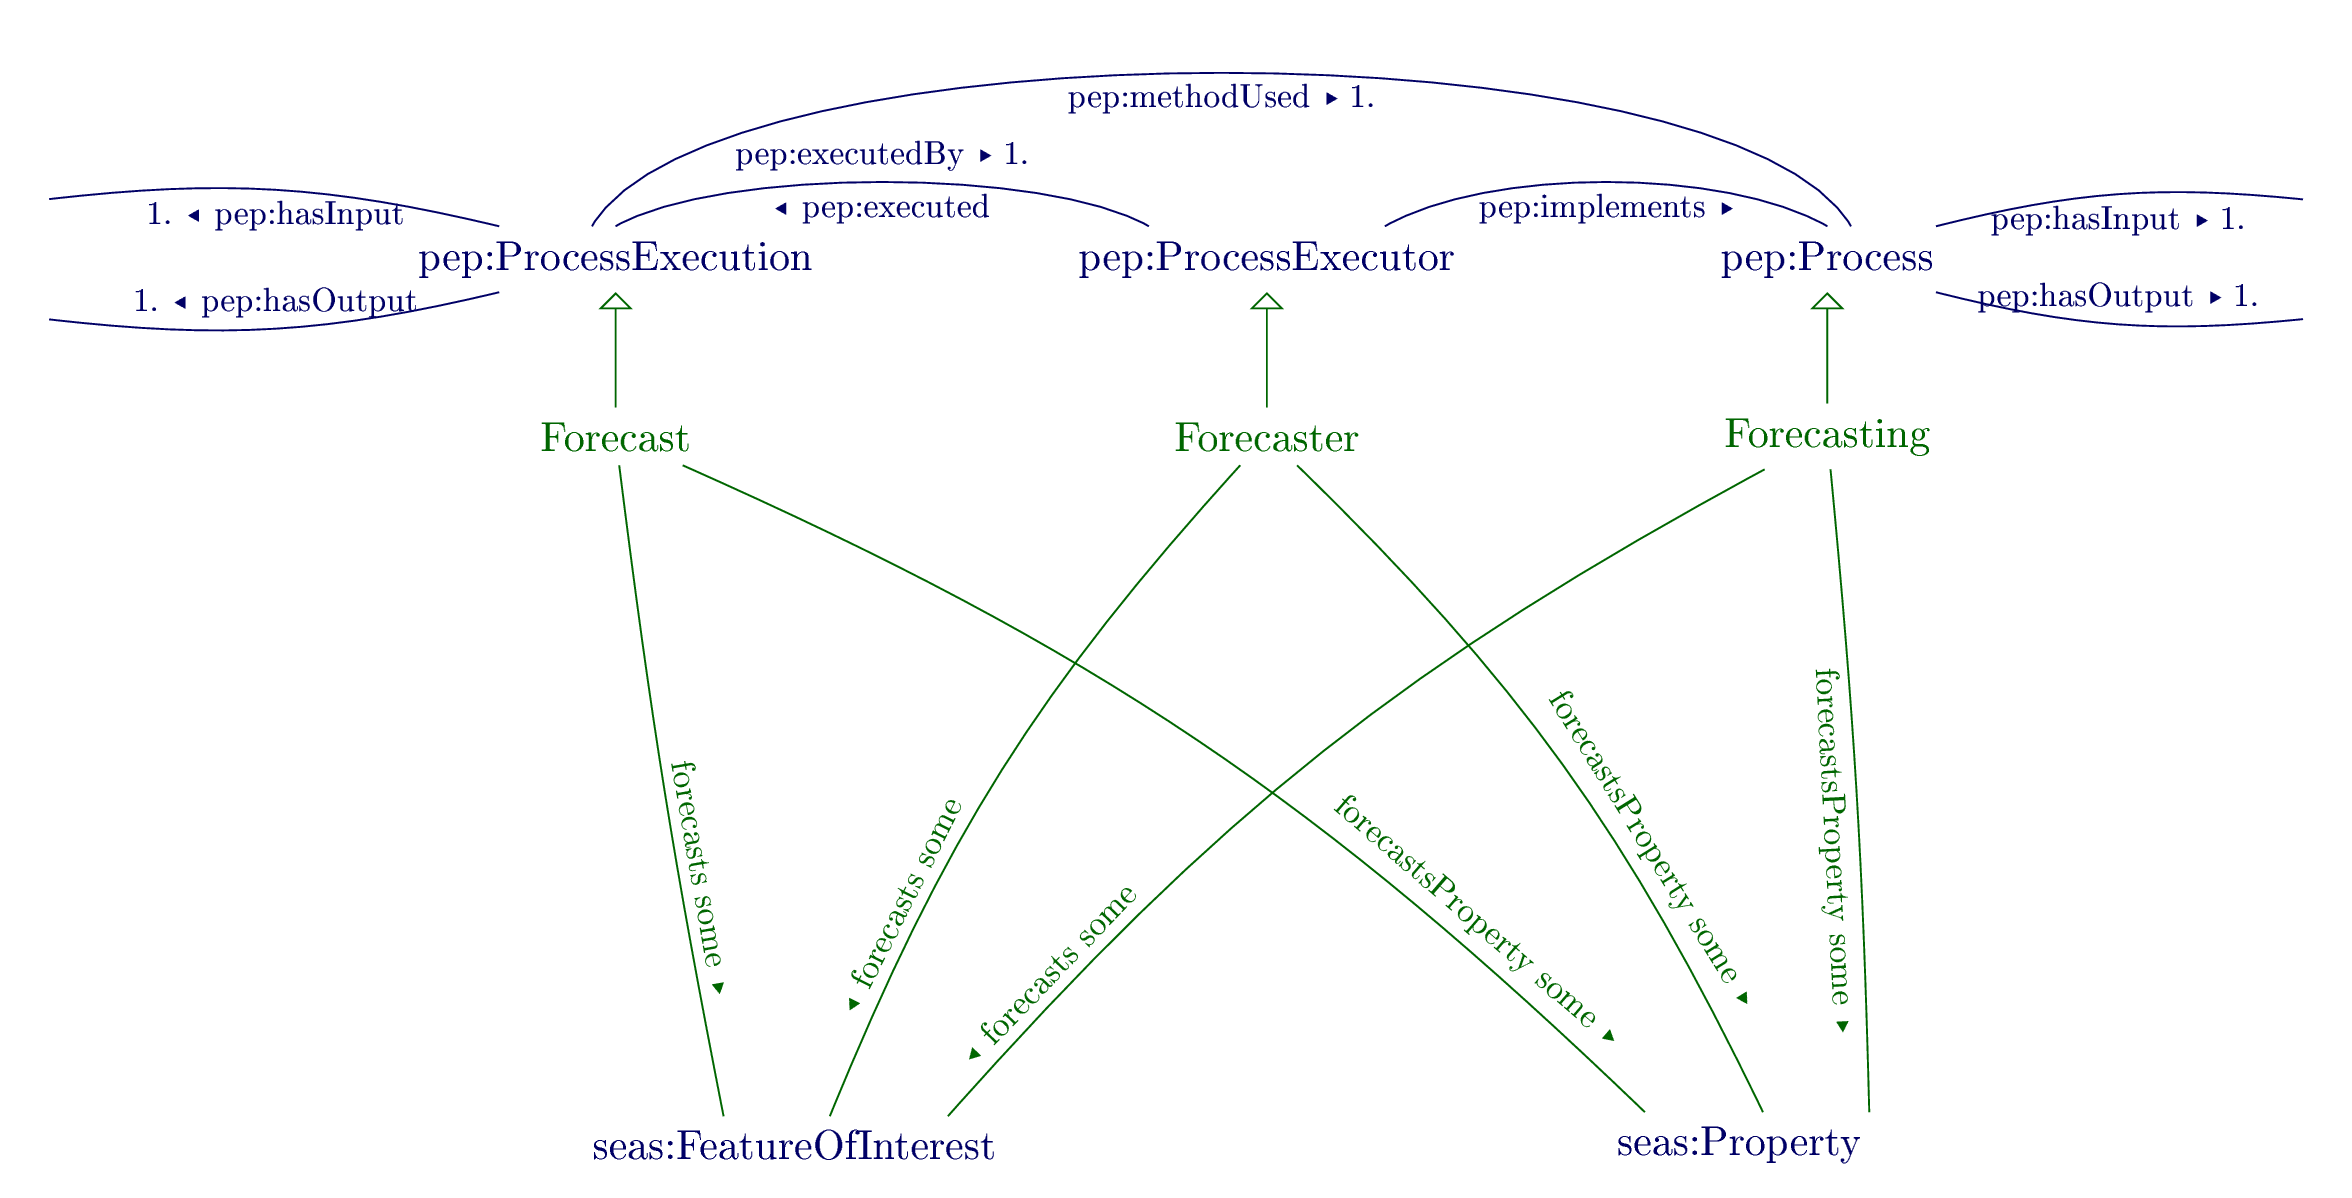 Overview of the Forecasting ontology